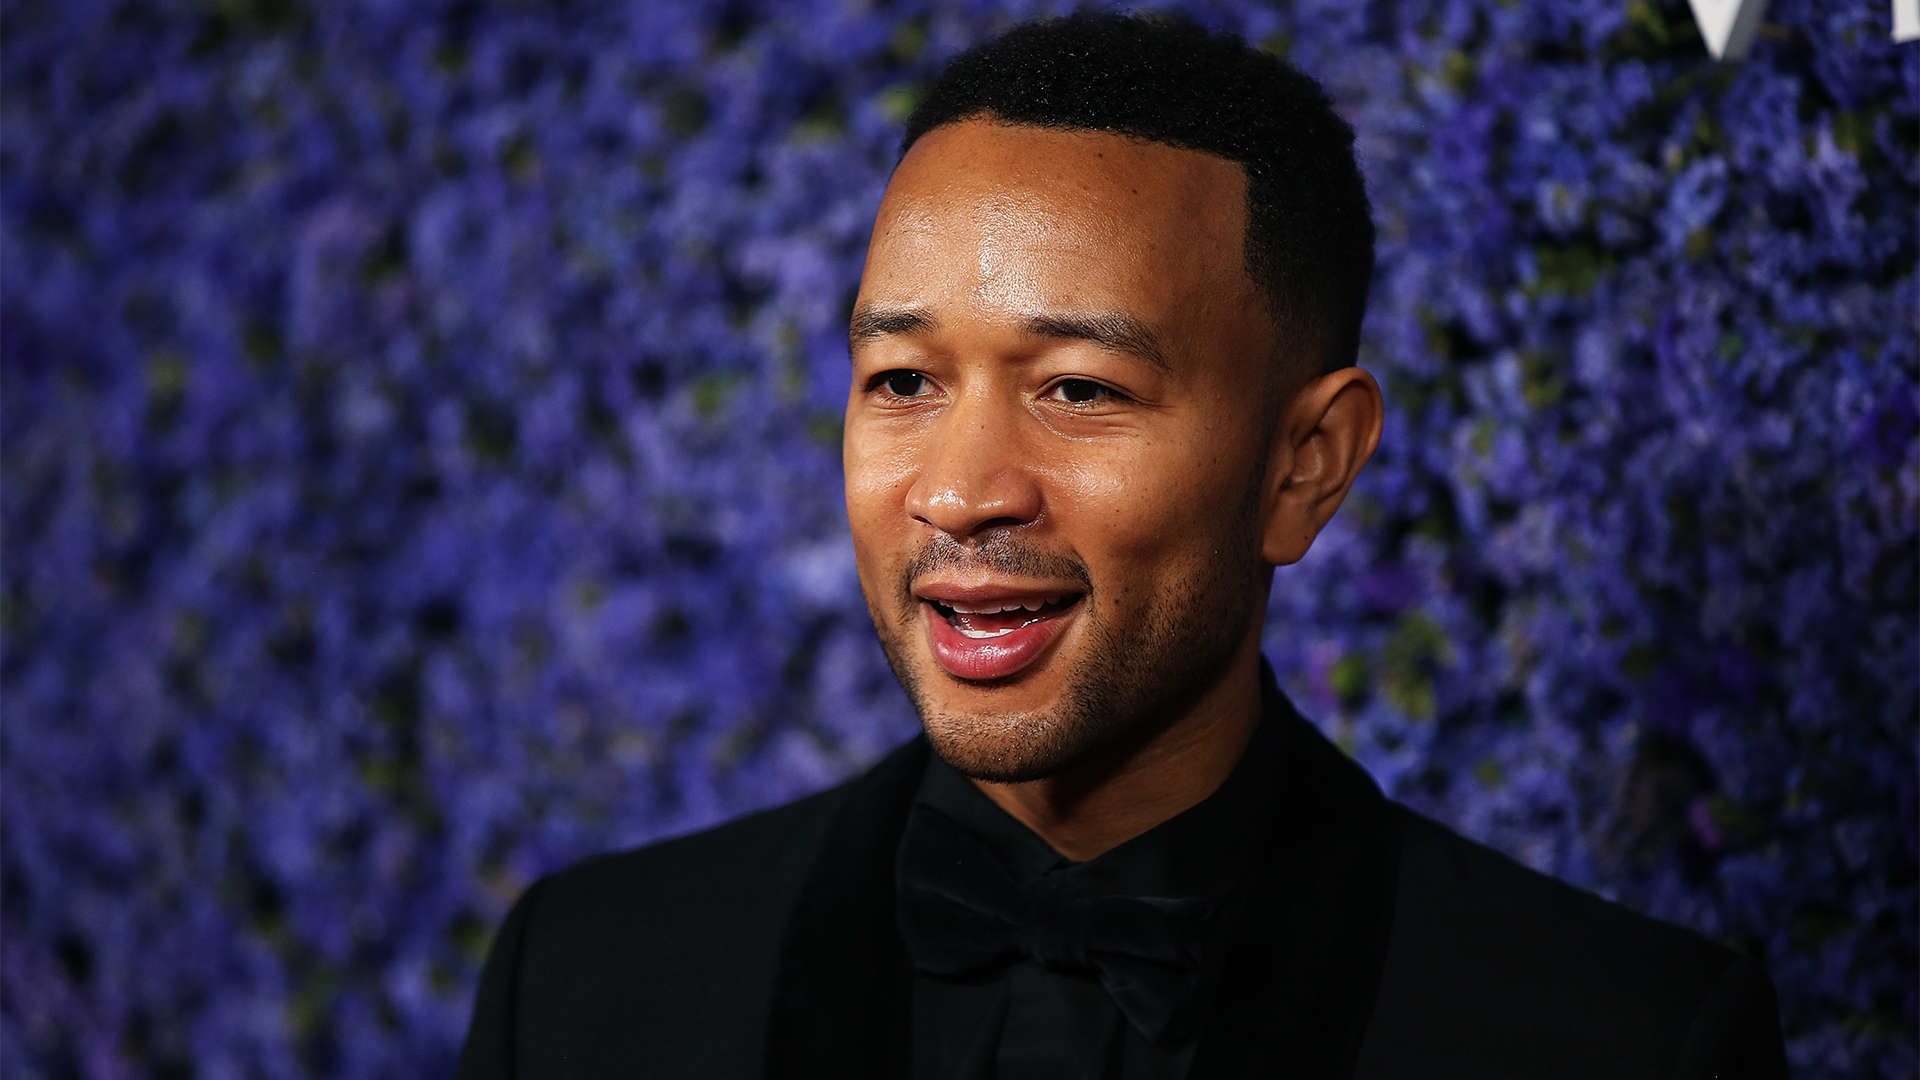 John Legend Partners With Digital Media Giants To Launch NFT Platform Designed With Artists In Mind